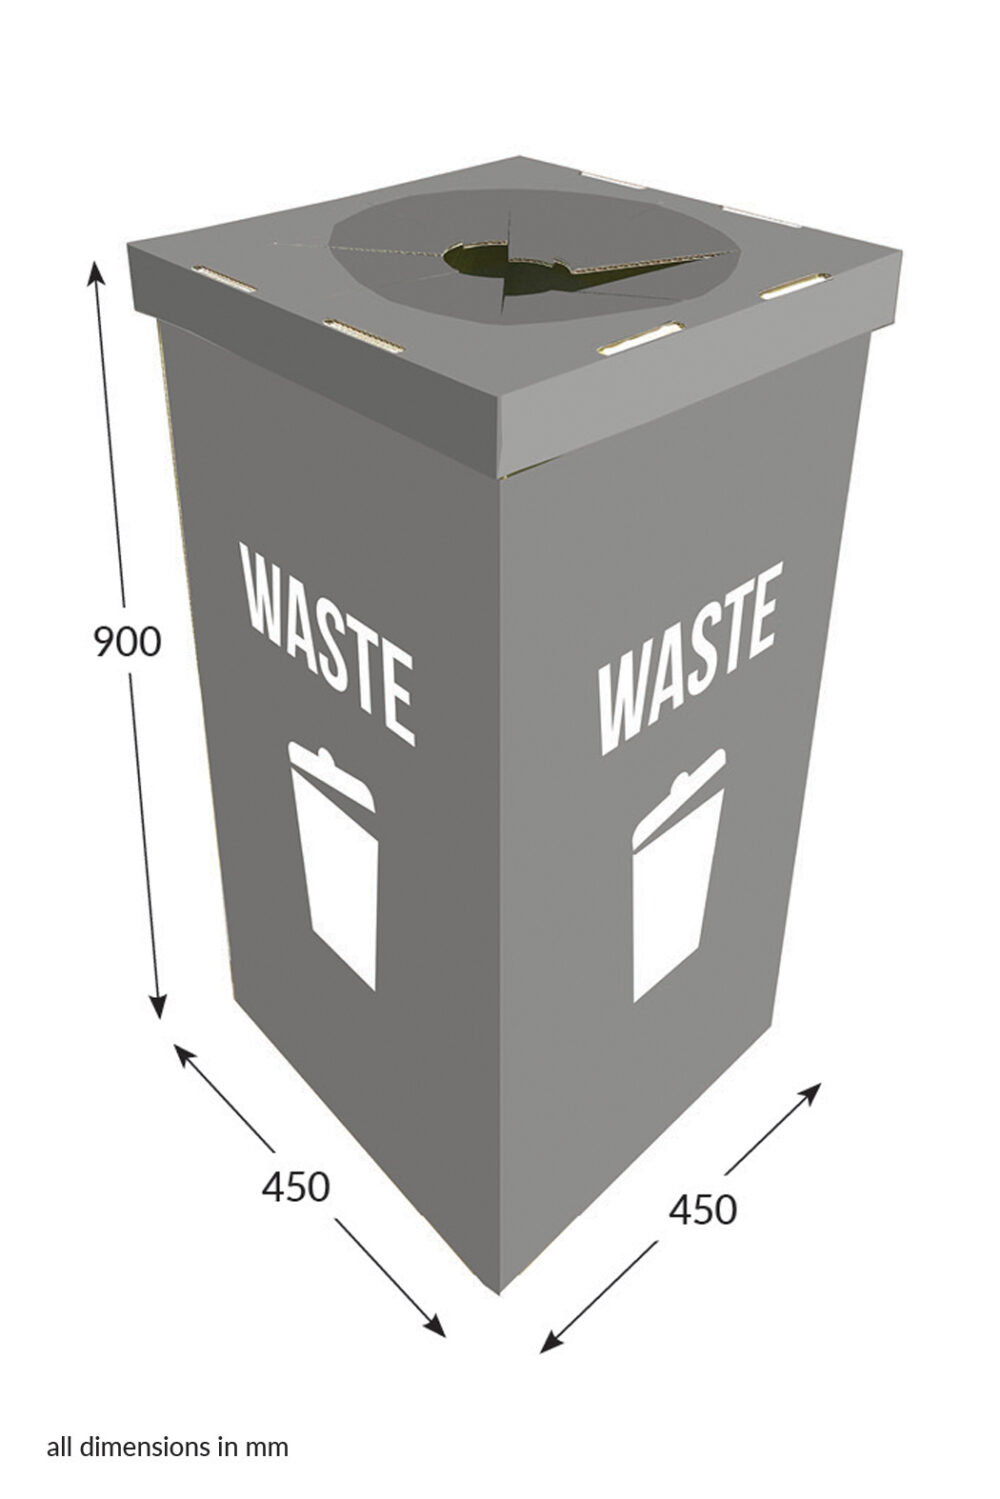 Featured image for “Large Square Dump Bin With Lid - Waste (Grey)”